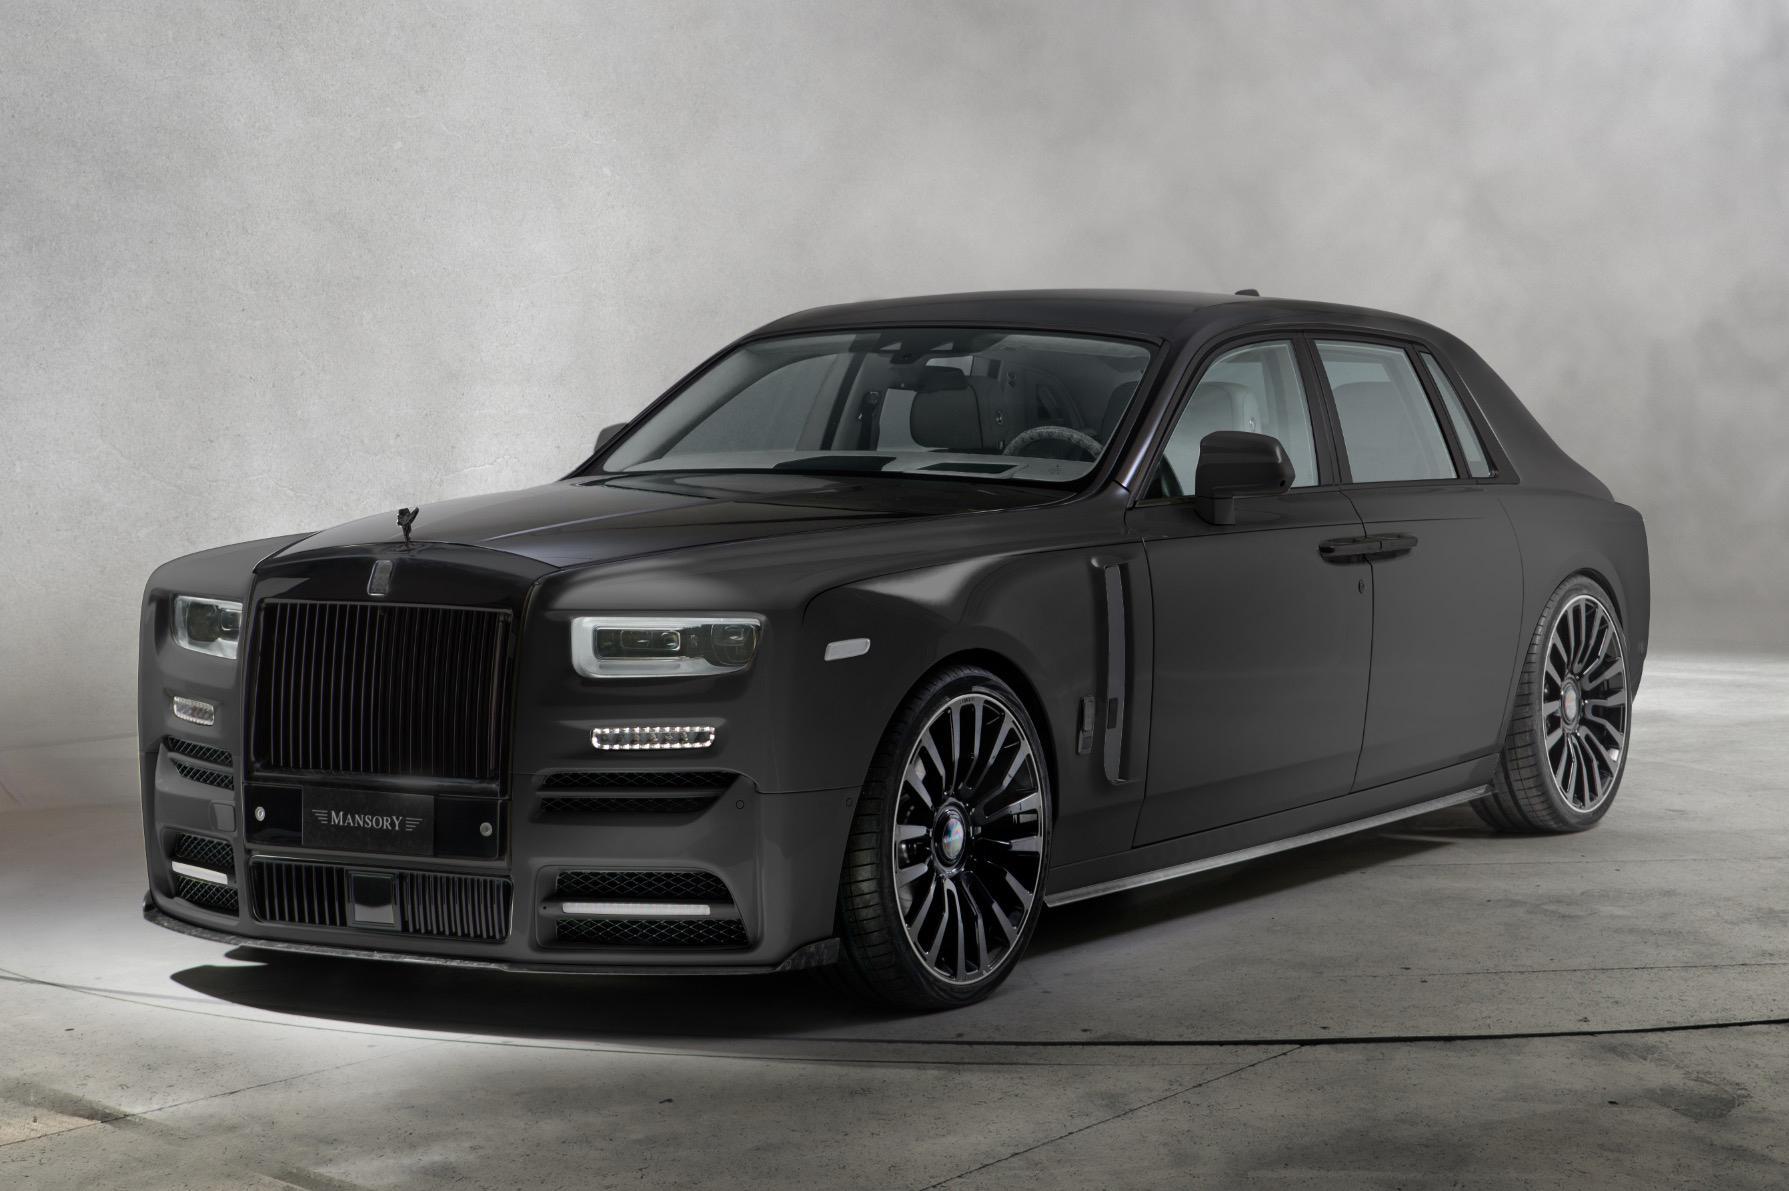 Mansory Carbon Fiber Body kit set for RollsRoyce Phantom VIII Buy with  delivery installation affordable price and guarantee